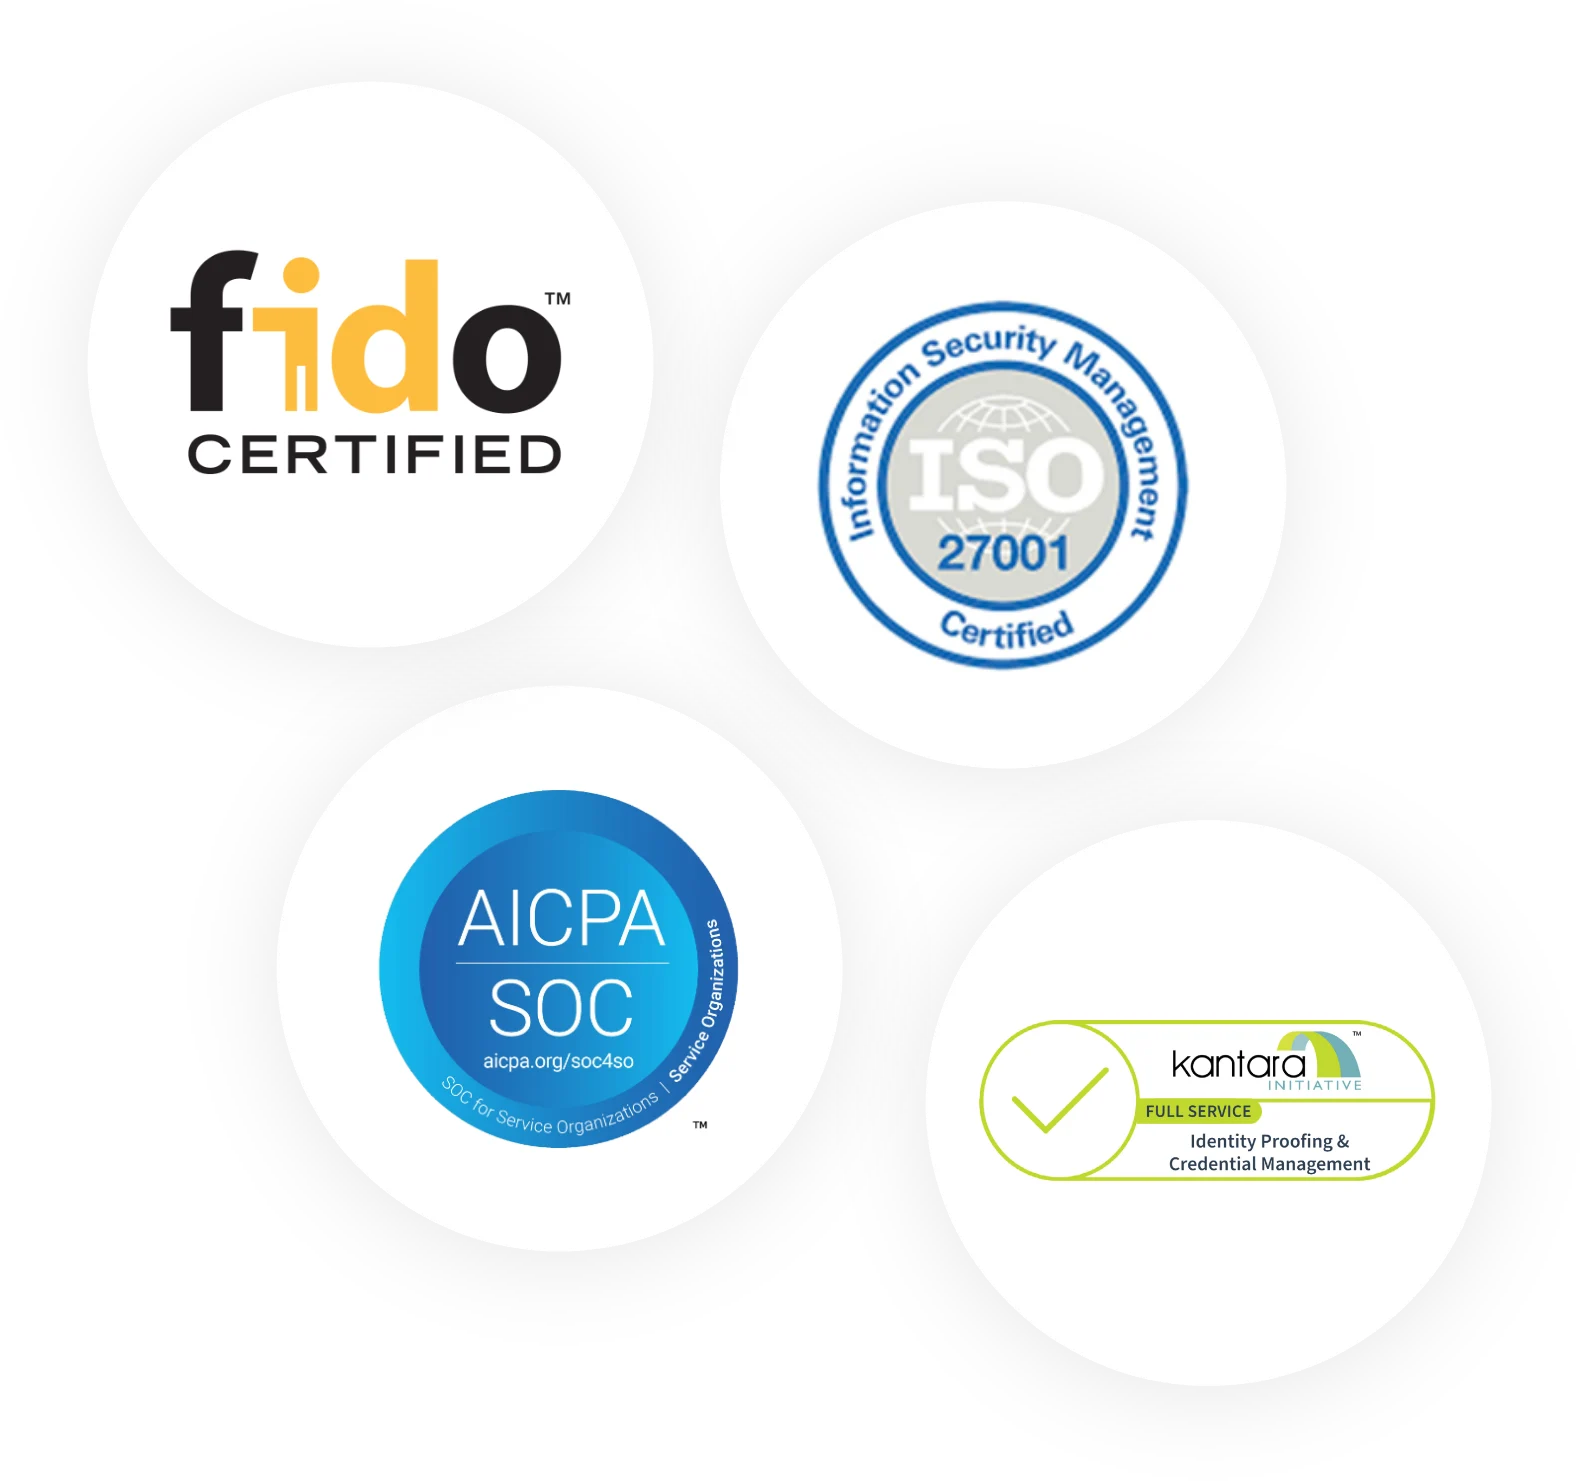 Fido Certified. AICPA SOC. Information Security Management. Kantara Initiative Full Service Identity Proofing & Credential Management.